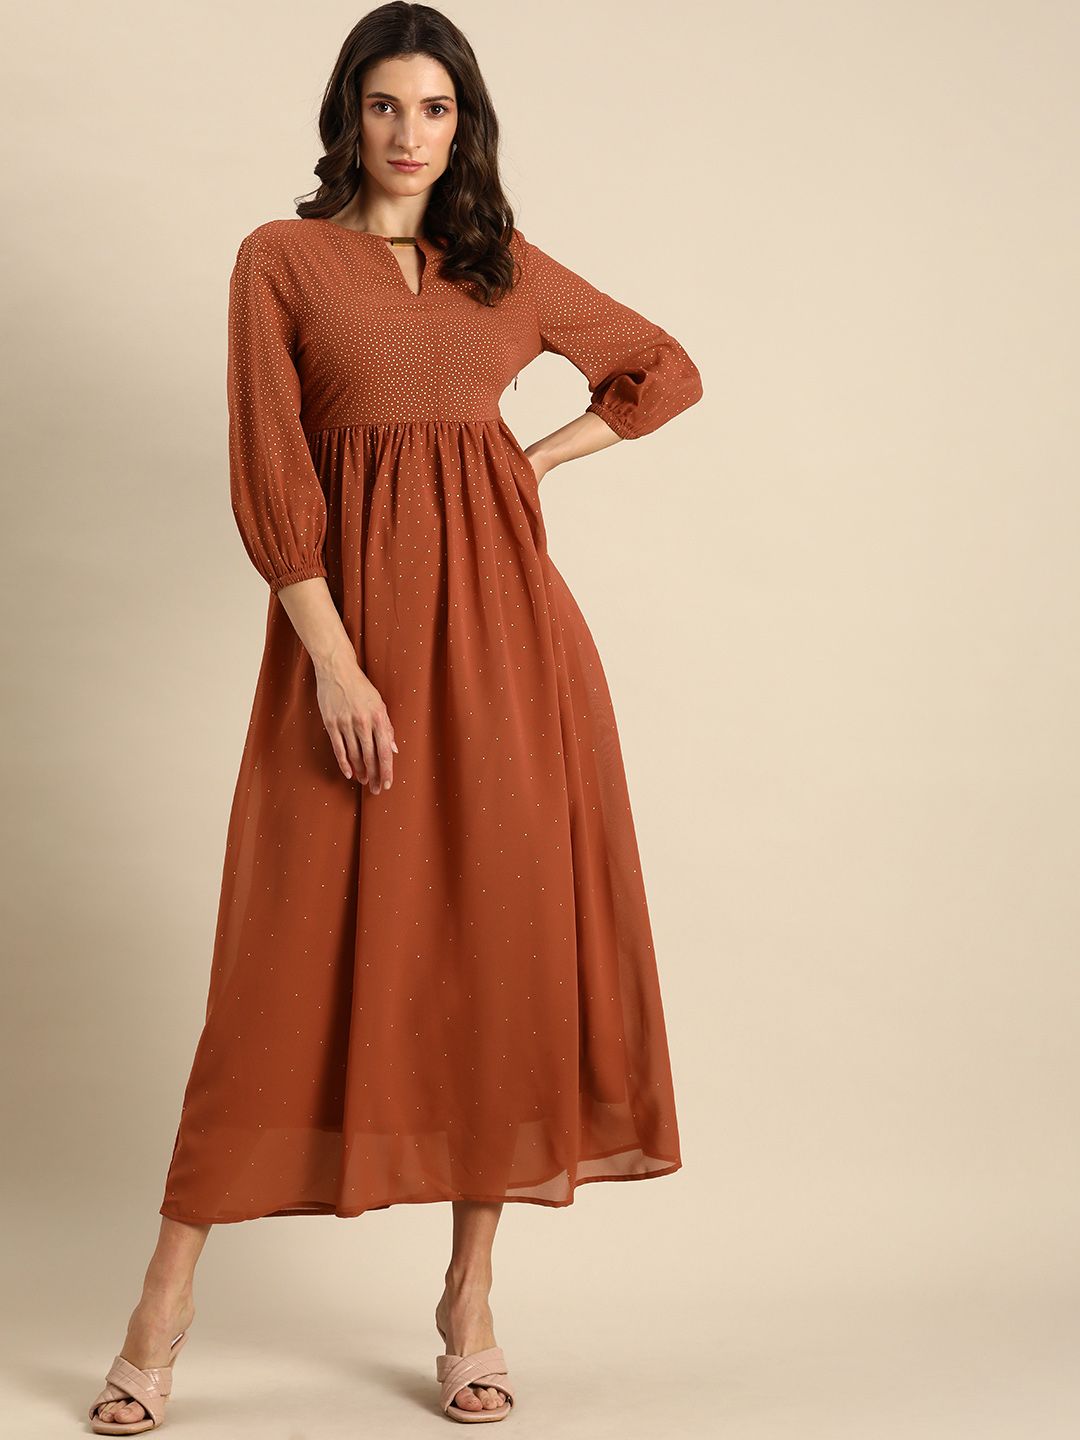 all about you Brown Polka Dot Keyhole Neck Maxi Dress Price in India